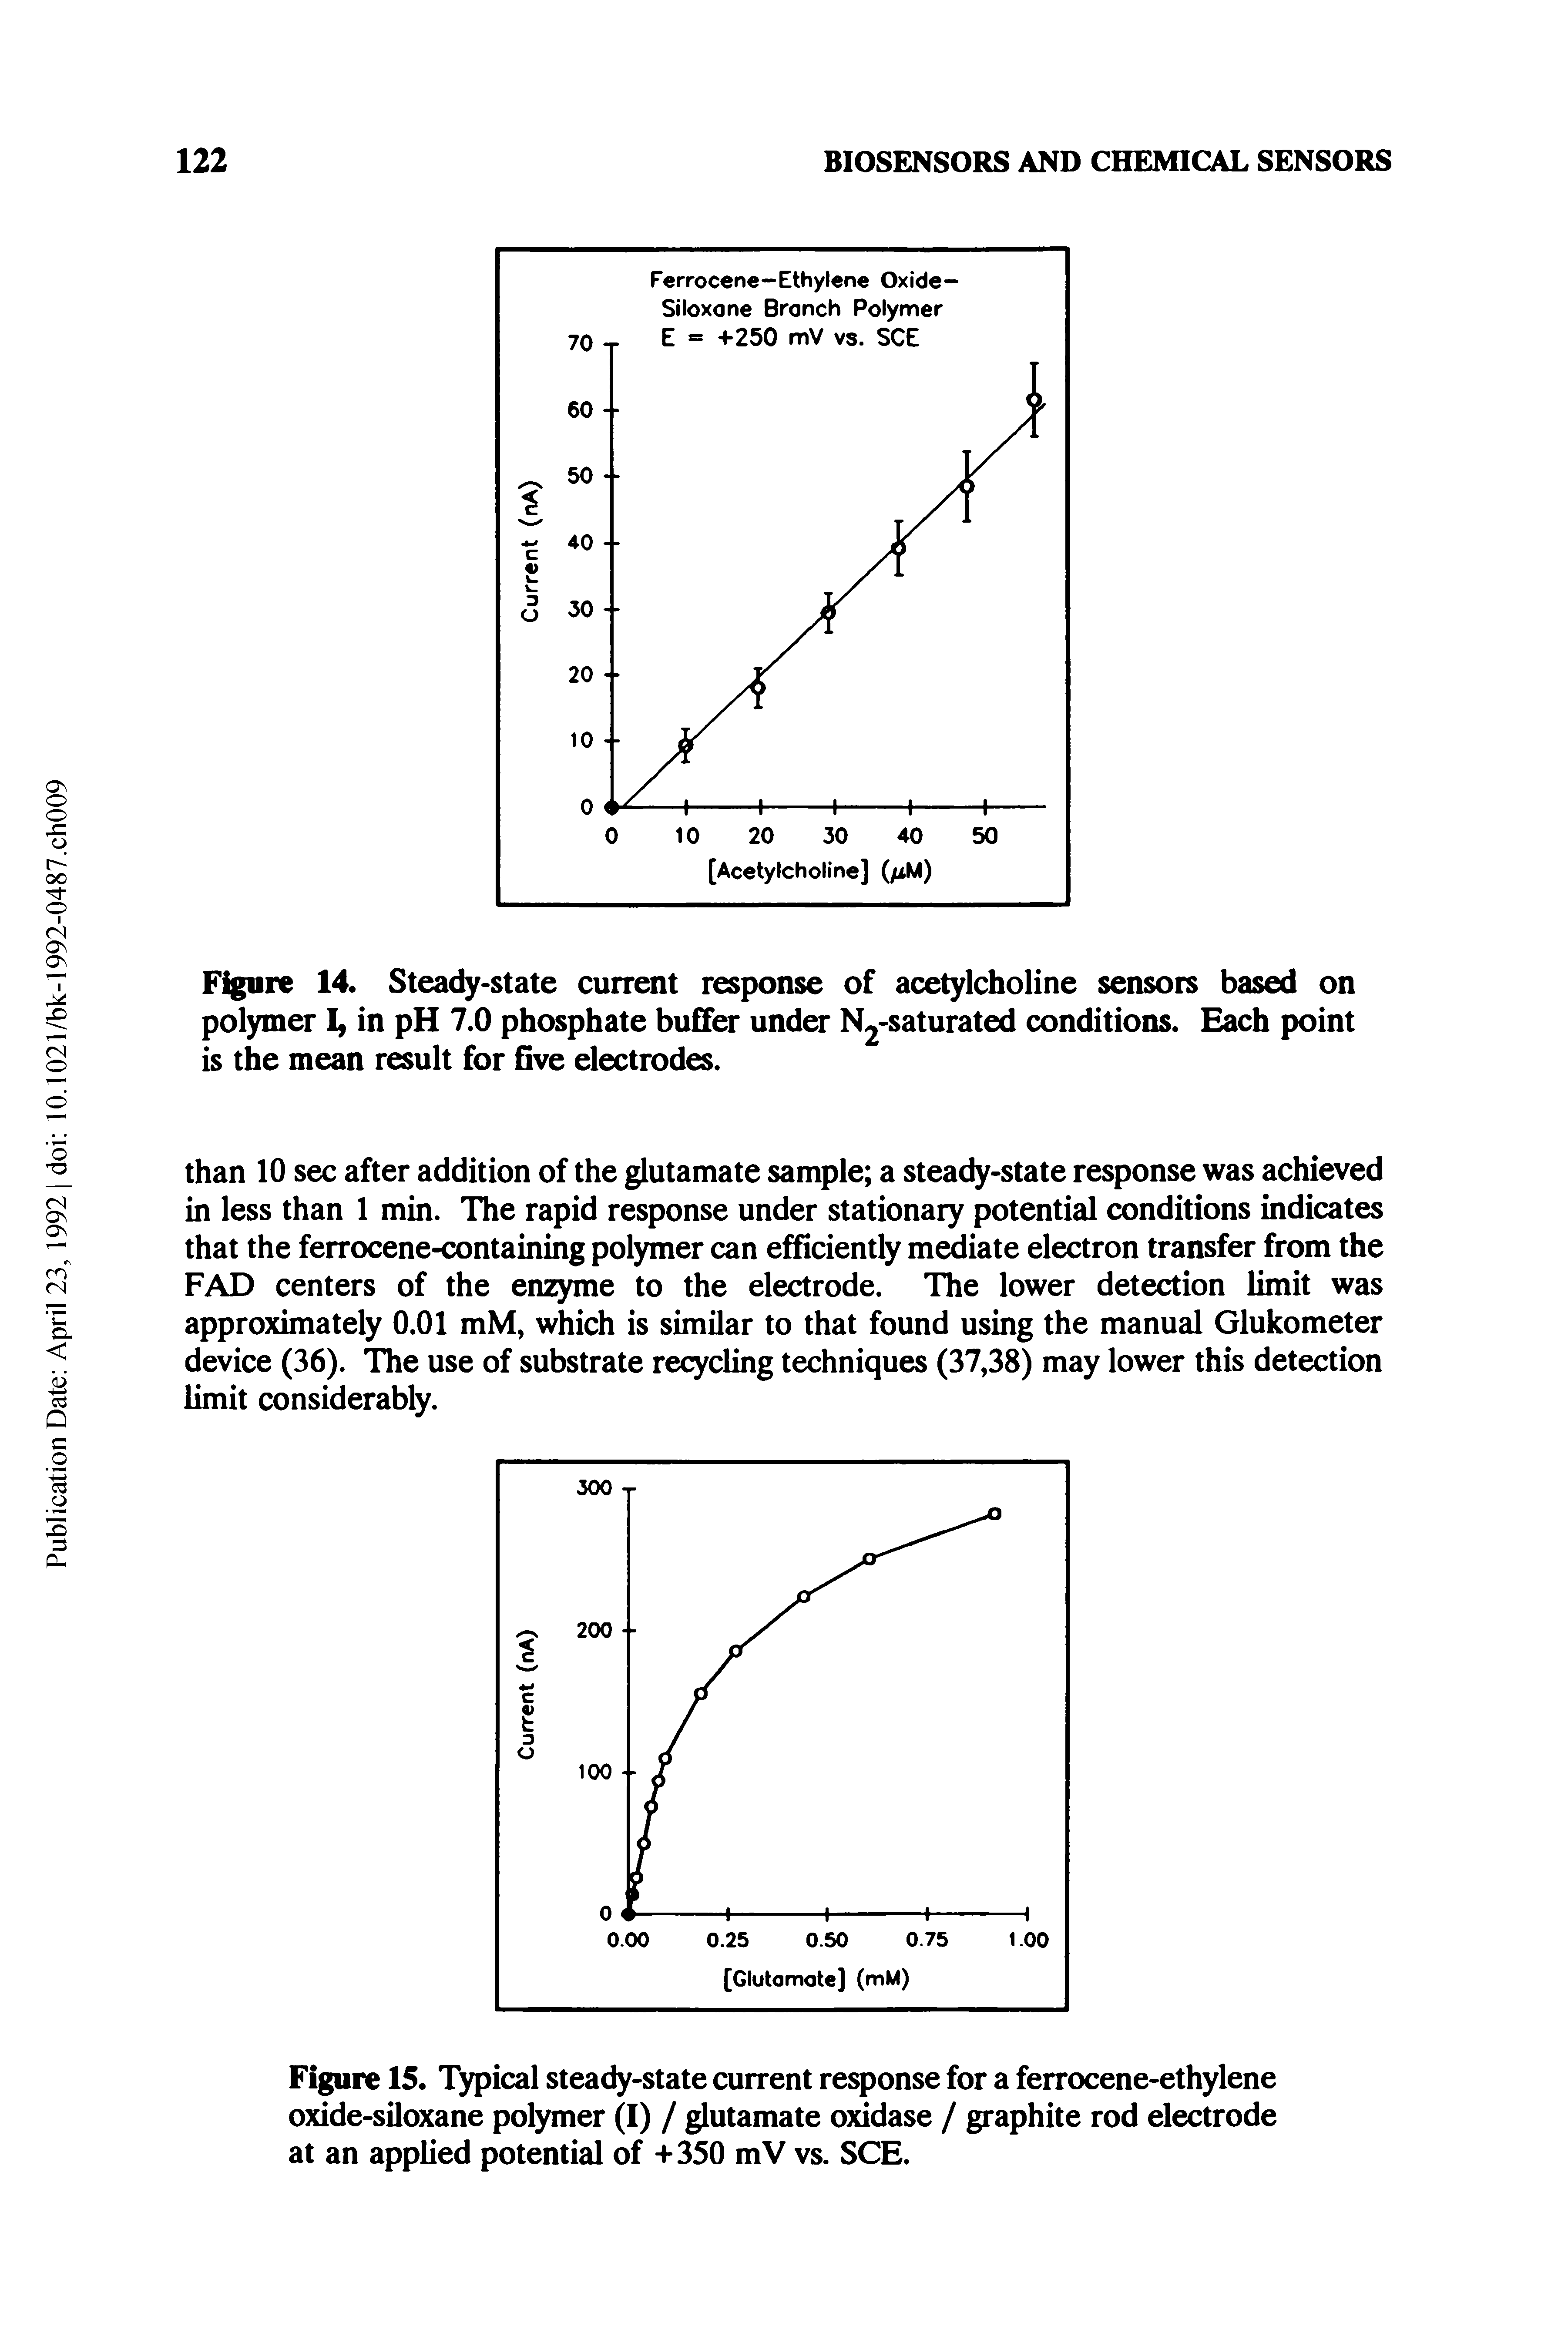 Figure 15. Typical steady-state current response for a ferrocene-ethylene oxide-siloxane polymer (I) / glutamate oxidase / graphite rod electrode at an applied potential of +350 mV vs. SCE.